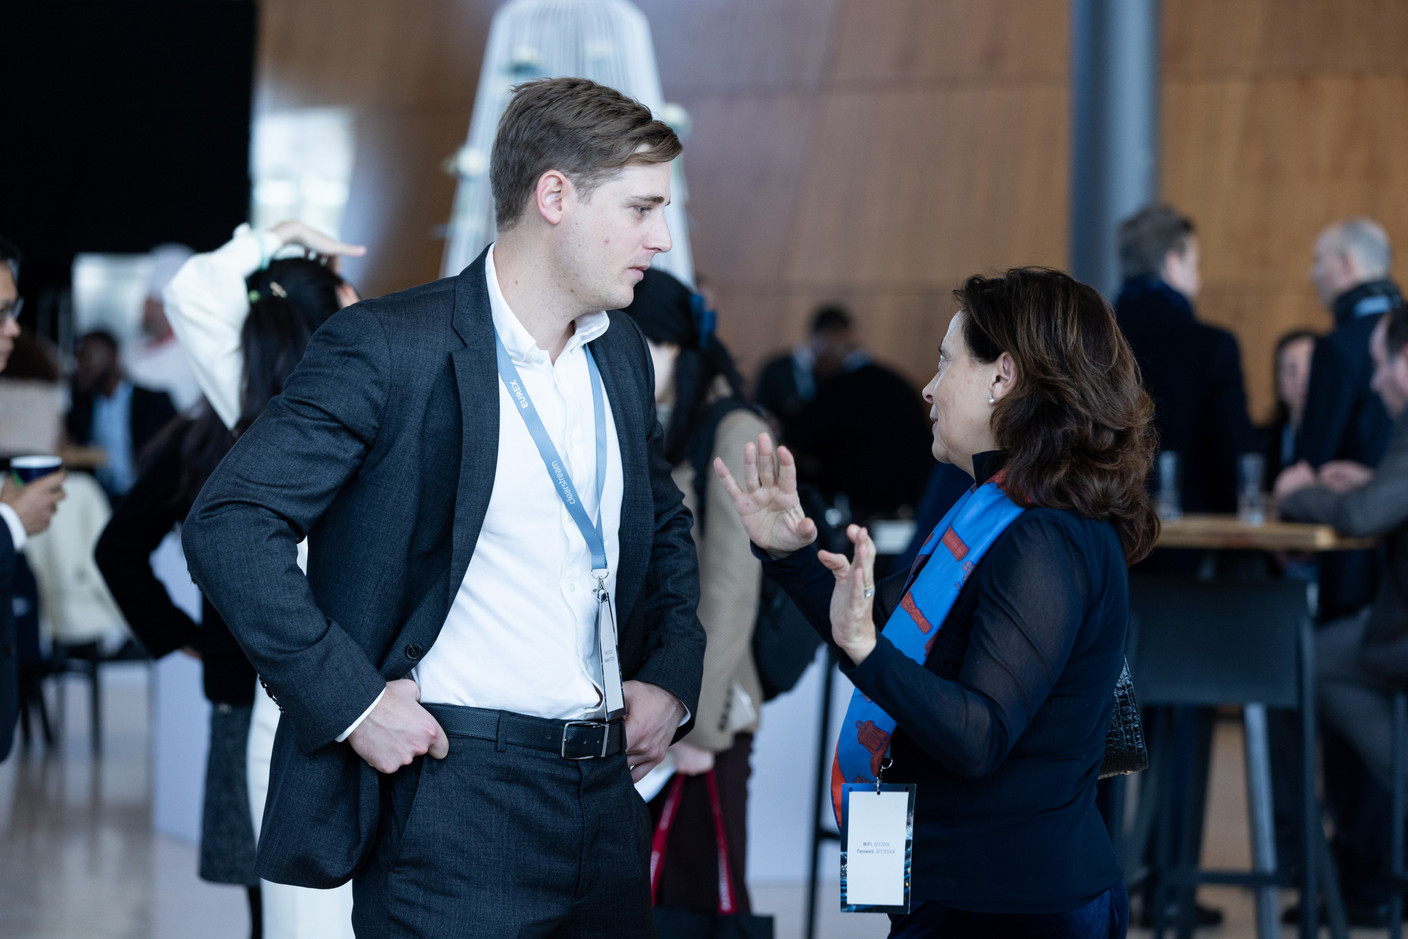 Attendees at Deutsche Börse’s 2024 Global Funding and Financing Summit, which took place at the European Convention Center in Kirchberg on 31 January and 1 February 2024. Photo: Eva Krins/Maison Moderne